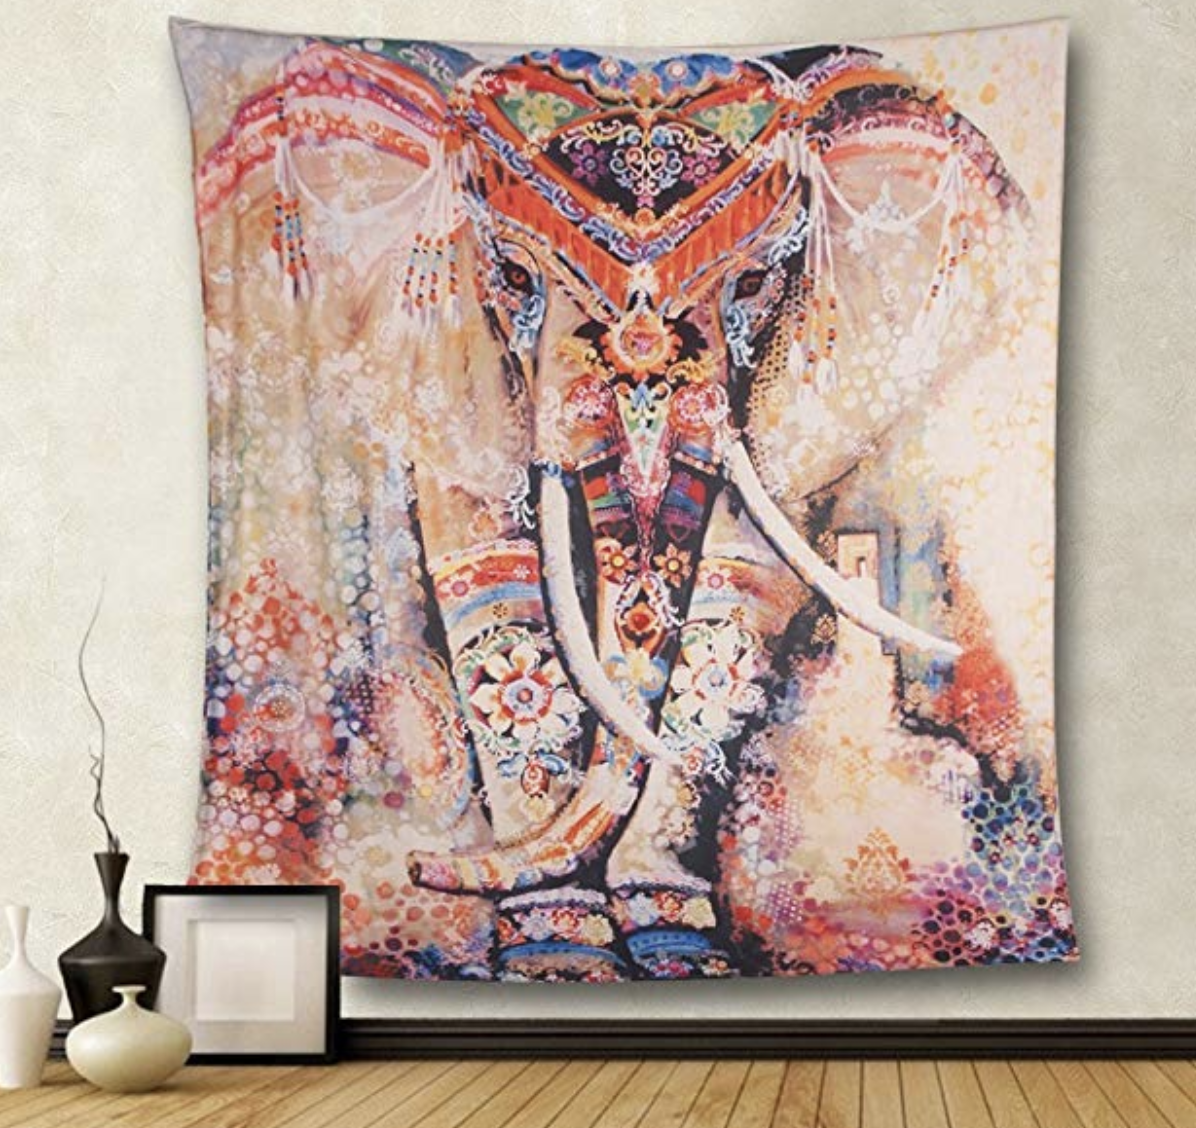 25 Cheap Tapestries that are PERFECT for your college dorm room! Easy and cheap way to decorate your dorm room! DIY dorm decor. Freshman year college . room decorations. Dorm Inspo #dorm #dormdecor #tapestry